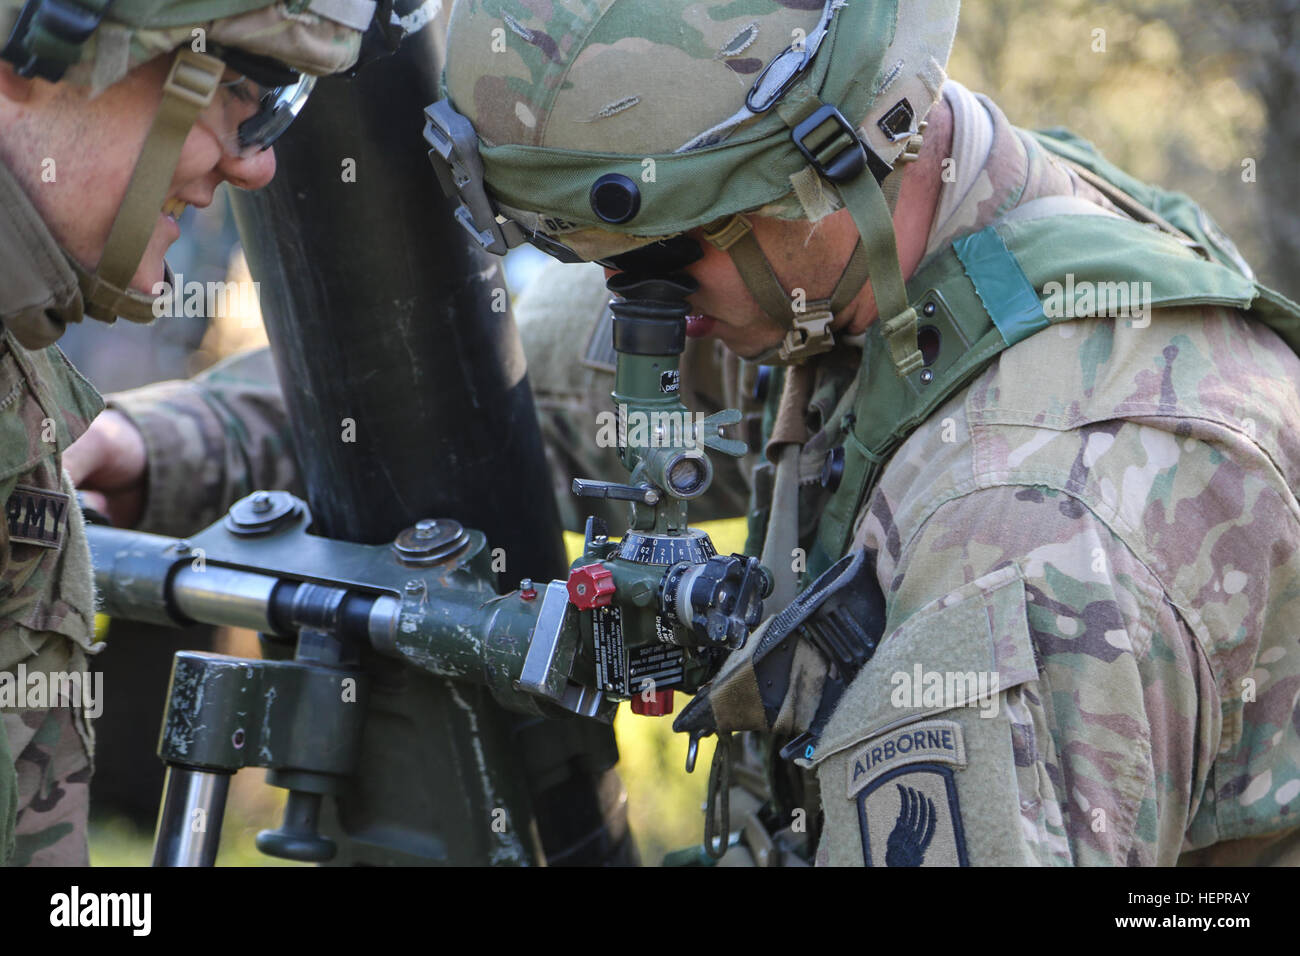 U.S. Soldiers of Bulldog Troop, 1st Squadron, 91st Cavalry Regiment, 173rd Airborne Brigade prepares an M120 mortar system while conducting defensive operations during exercise Saber Junction 16 at the U.S. Army’s Joint Multinational Readiness Center (JMRC) in Hohenfels, Germany, April 19, 2016. Saber Junction 16 is the U.S. Army Europe’s 173rd Airborne Brigade’s combat training center certification exercise, taking place at the JMRC in Hohenfels, Germany, Mar. 31-Apr. 24, 2016.  The exercise is designed to evaluate the readiness of the Army’s Europe-based combat brigades to conduct unified la Stock Photo